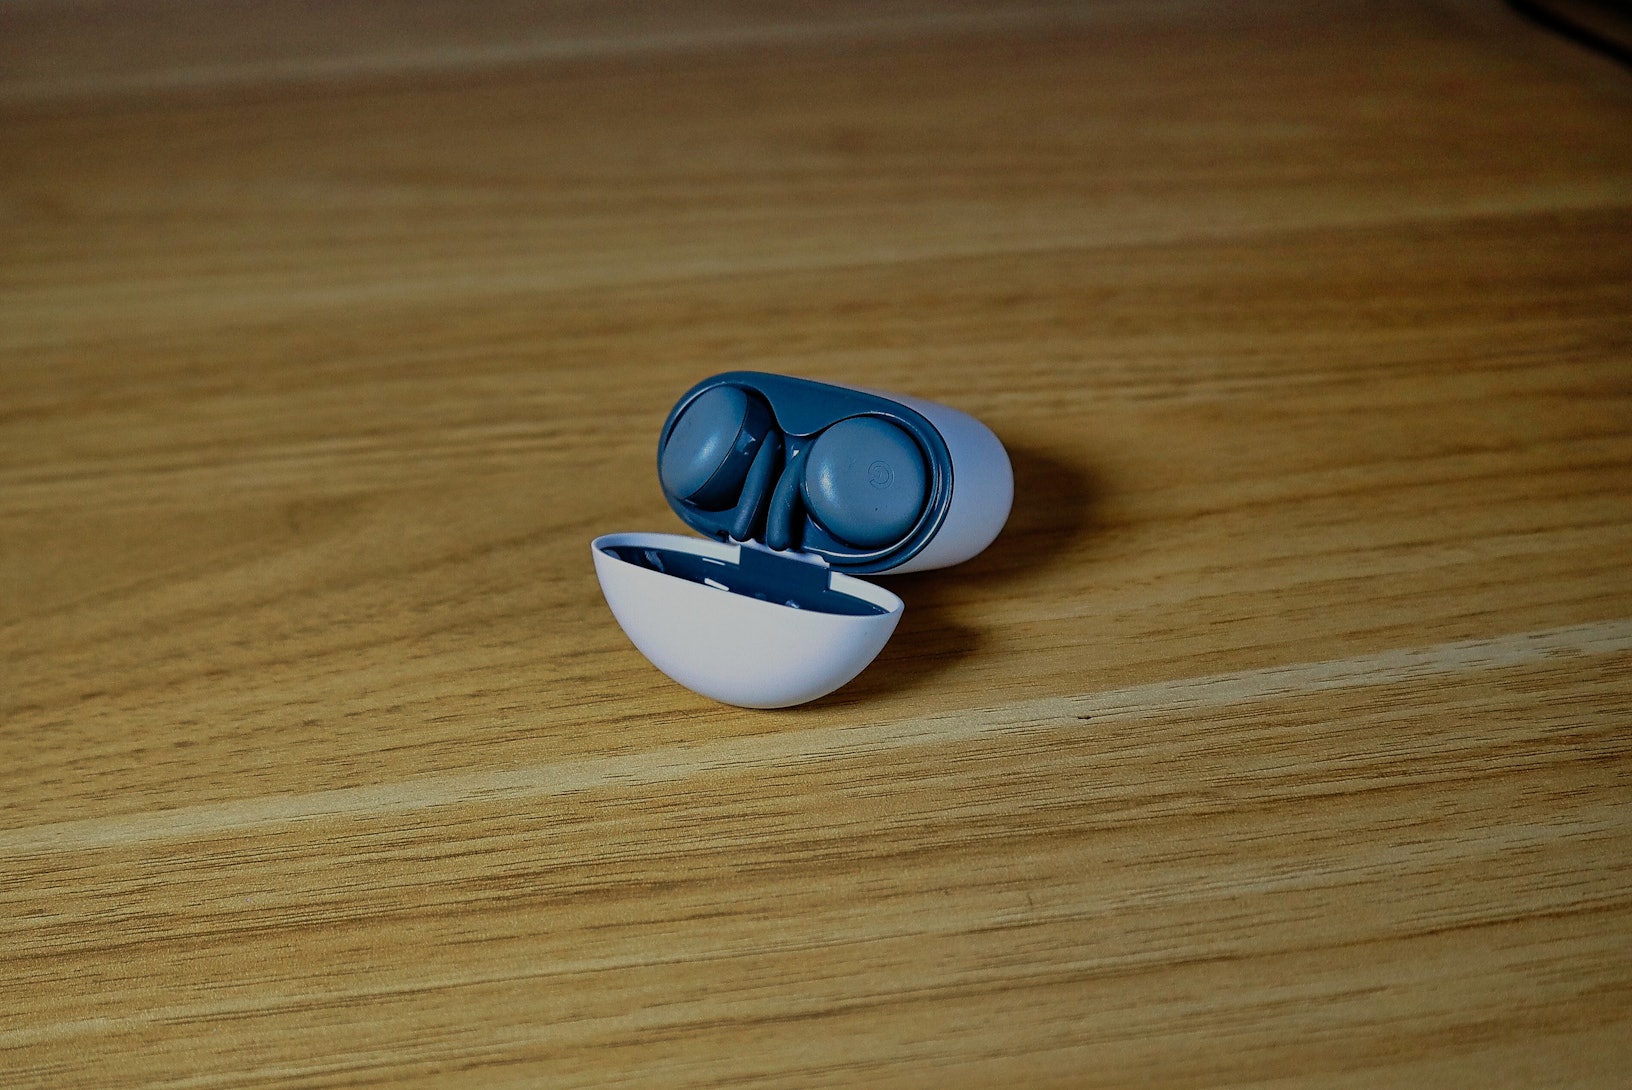 Google Pixel Buds A-Series Review: Why I Loved These $99 Earbuds